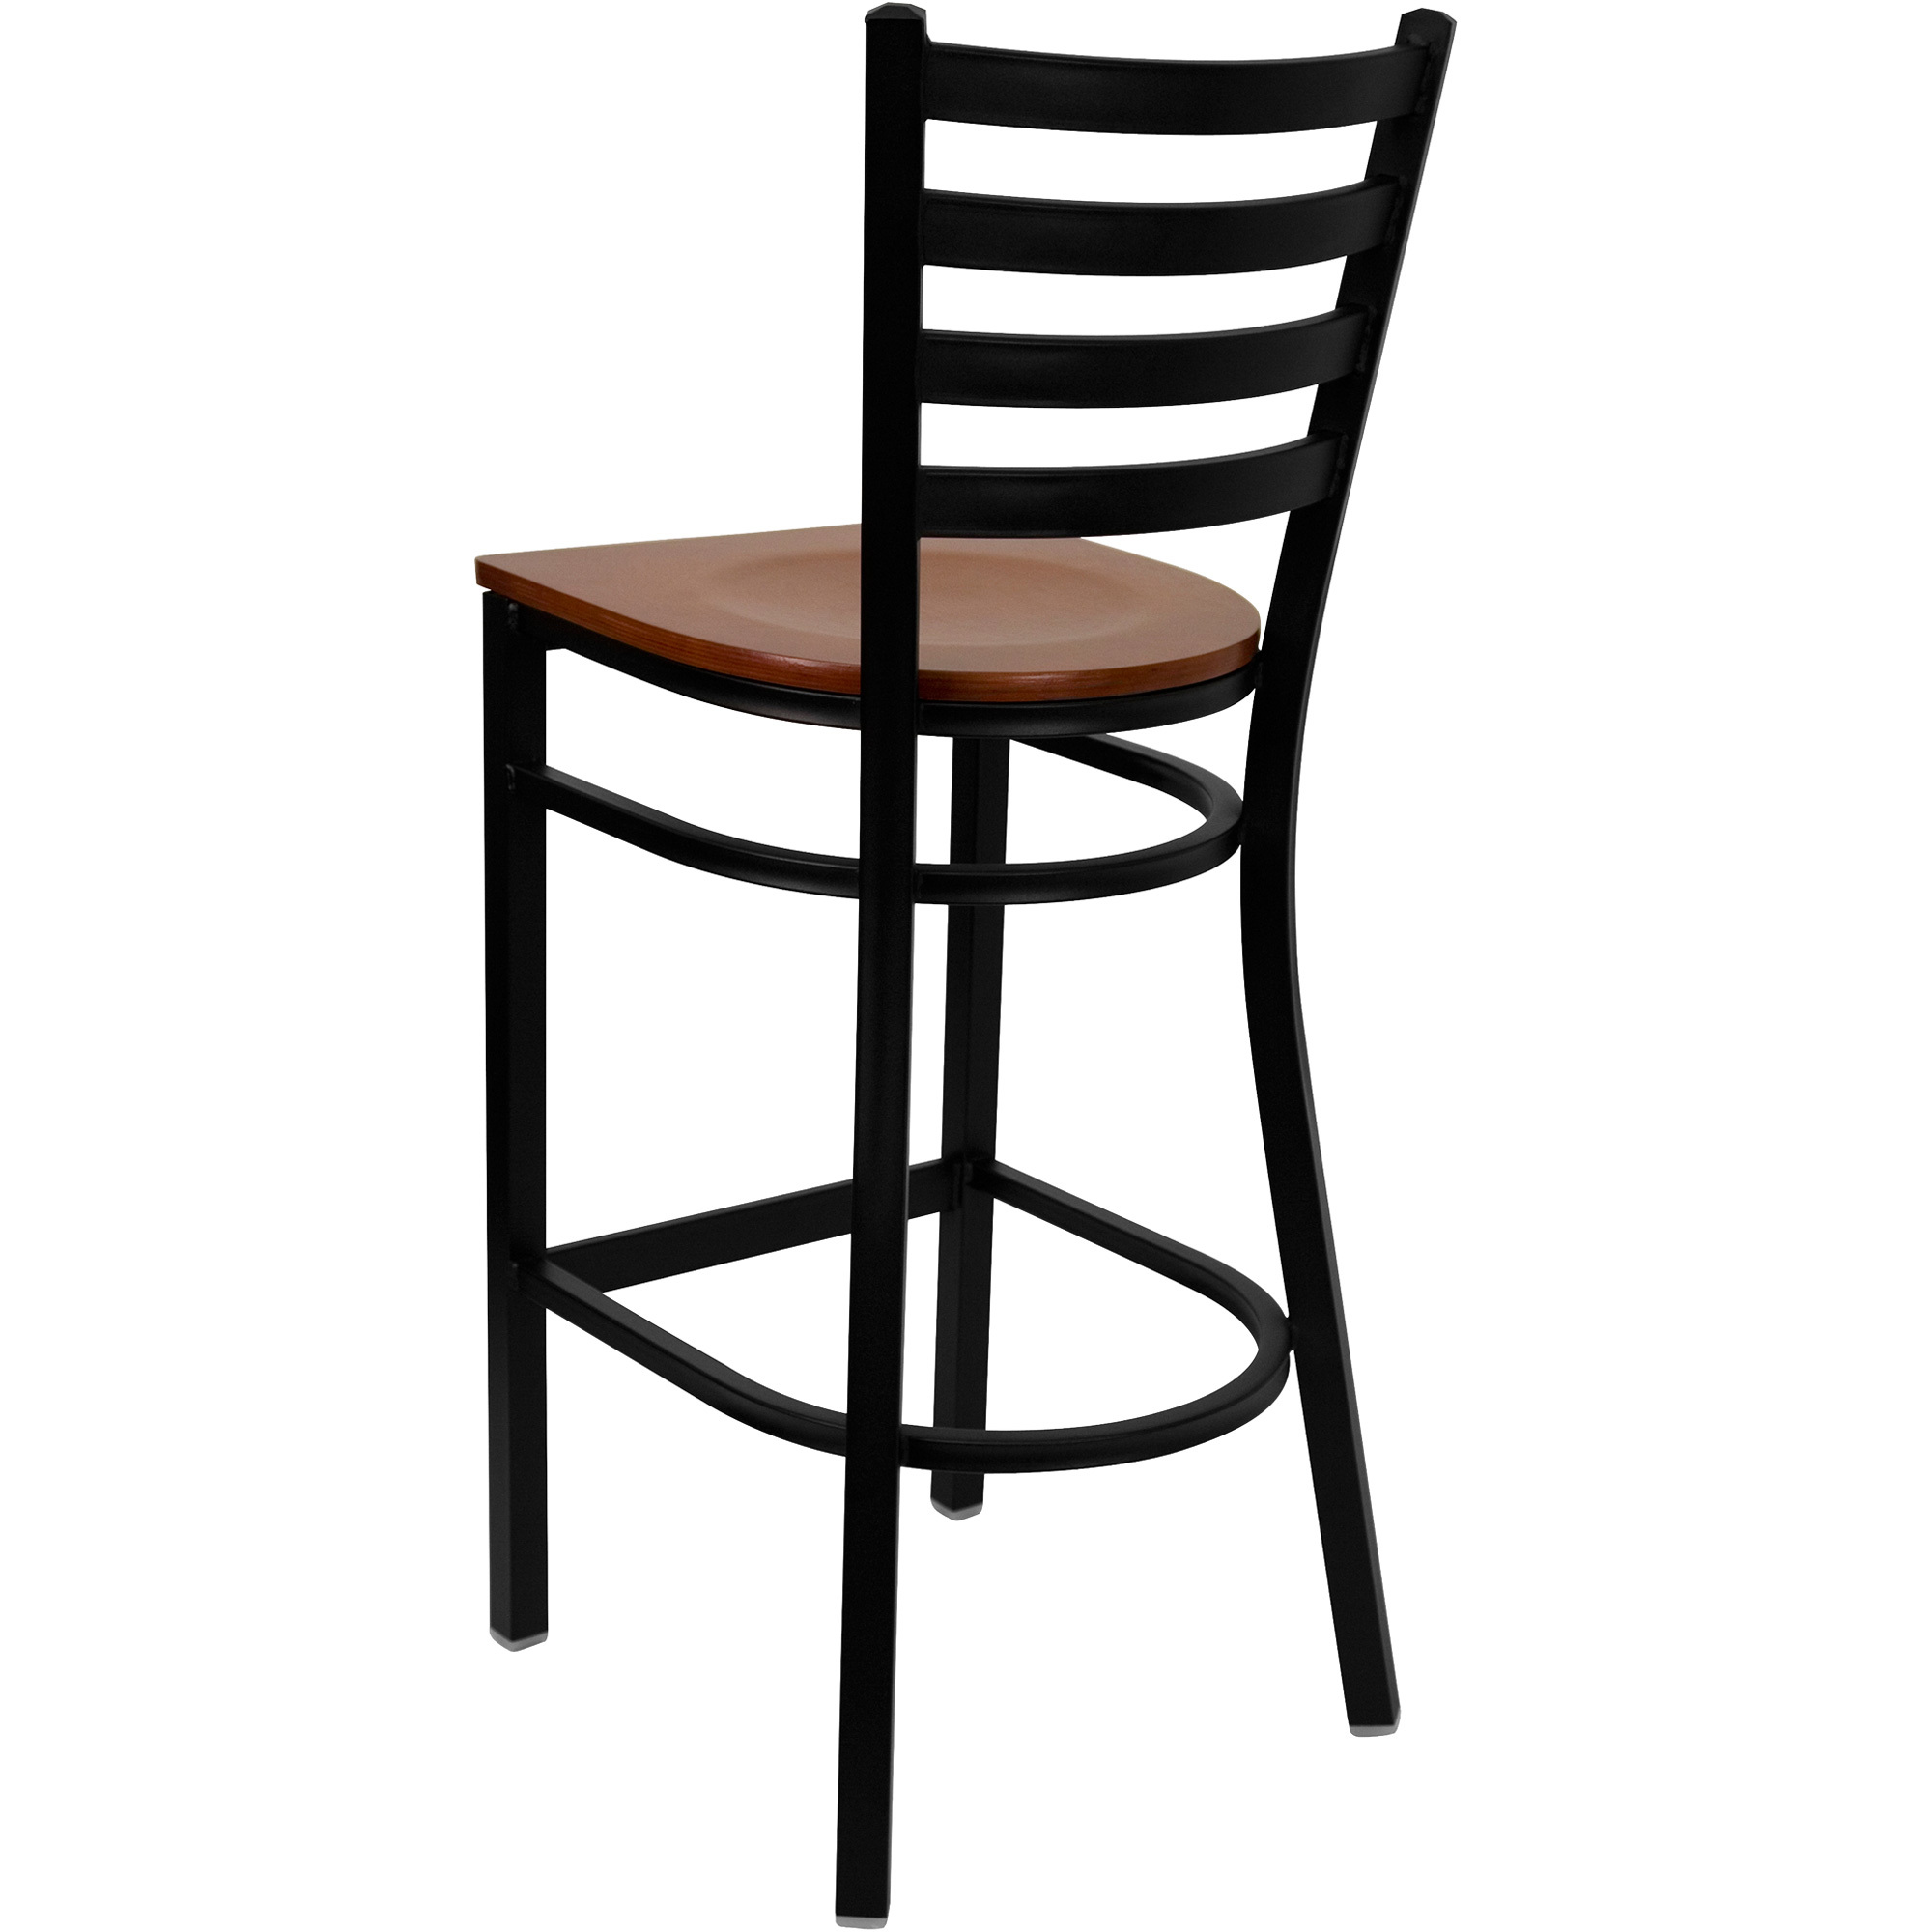 Flash Furniture Metal Stool with Ladder Back/Padded Seat — Black Frame/Cherry Seat, 500-Lb. Capacity, 17Inch W x 18Inch D x 42 1/4Inch H, Model -  XUDG697BBARCHW